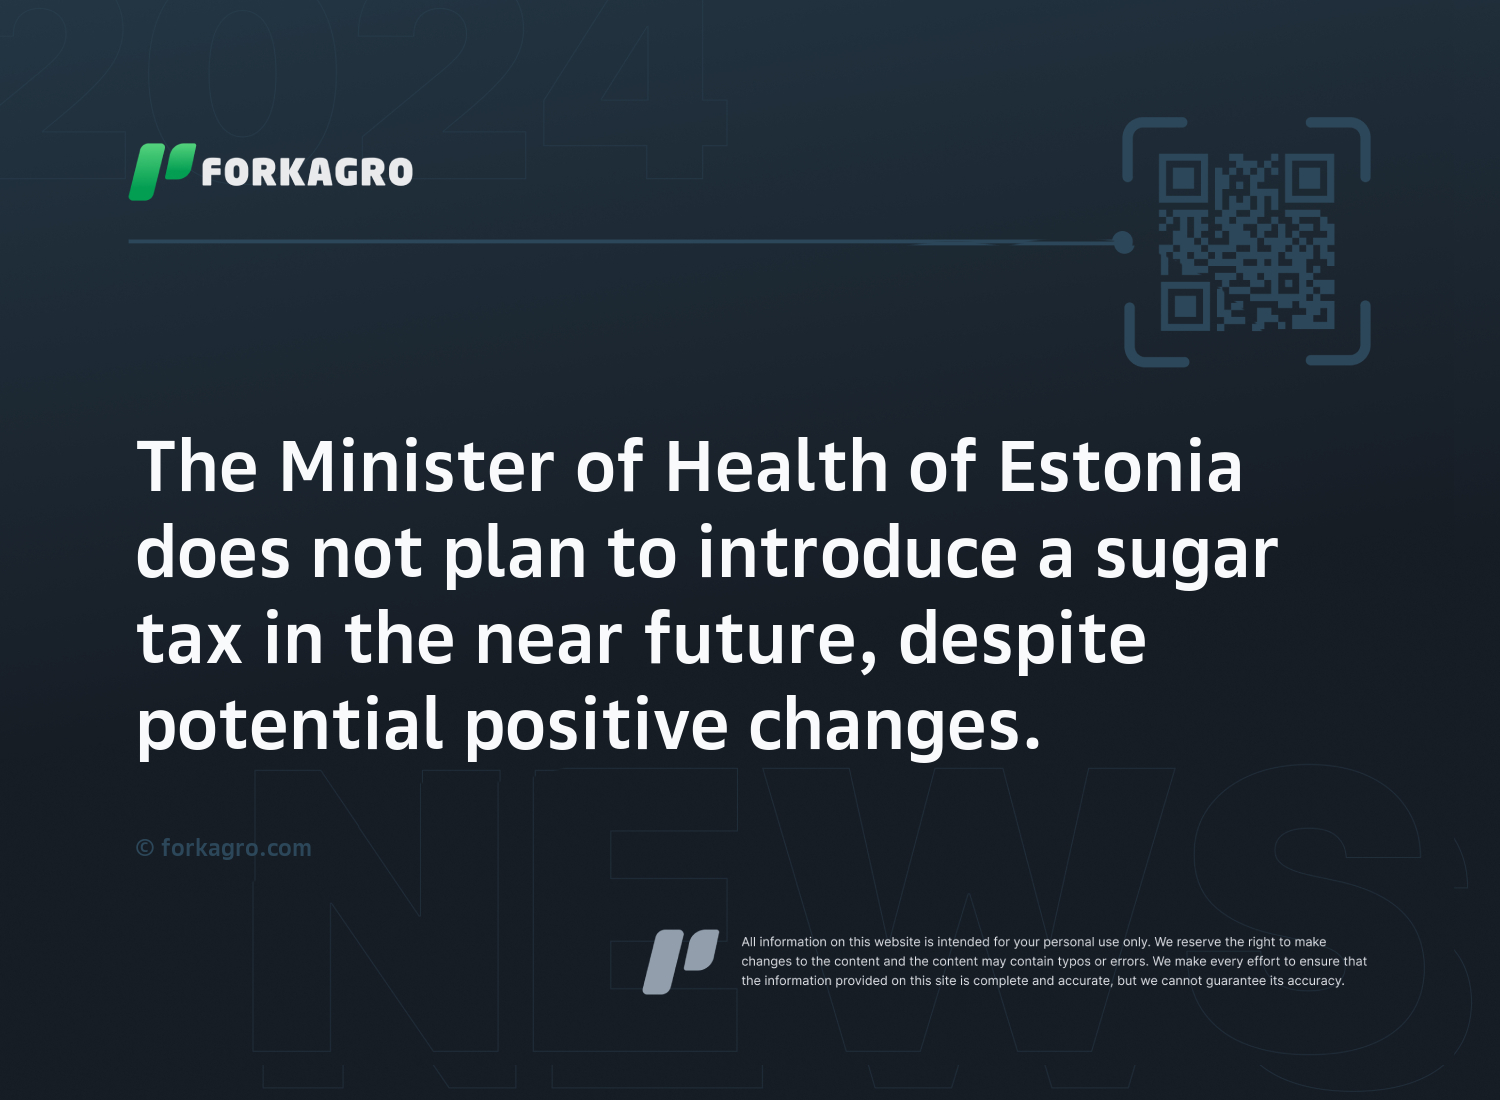 The Minister of Health of Estonia does not plan to introduce a sugar tax in the near future, despite potential positive changes.